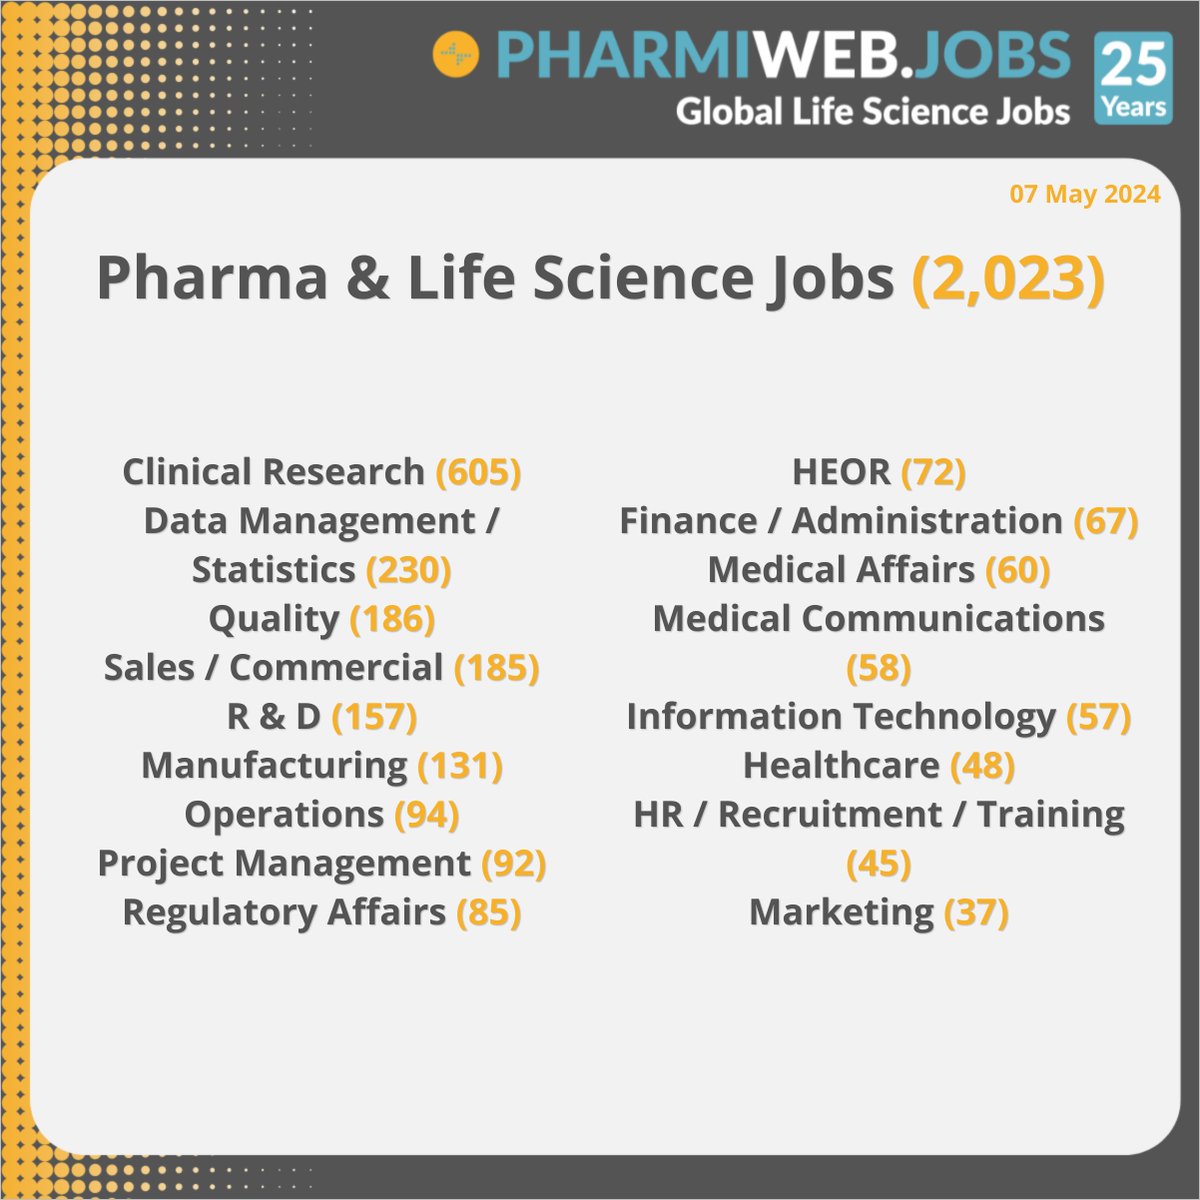 2,023 Pharma & Life Science Jobs Today
Search Now - buff.ly/3Uyj9dC

Register & Upload Your CV Now! buff.ly/3JWWwKV

#Pharma #Biotech #ClinicalResearch #LifeSciences #MedicalDevices #Biotechnology #PharmaJobs #PharmiWeb